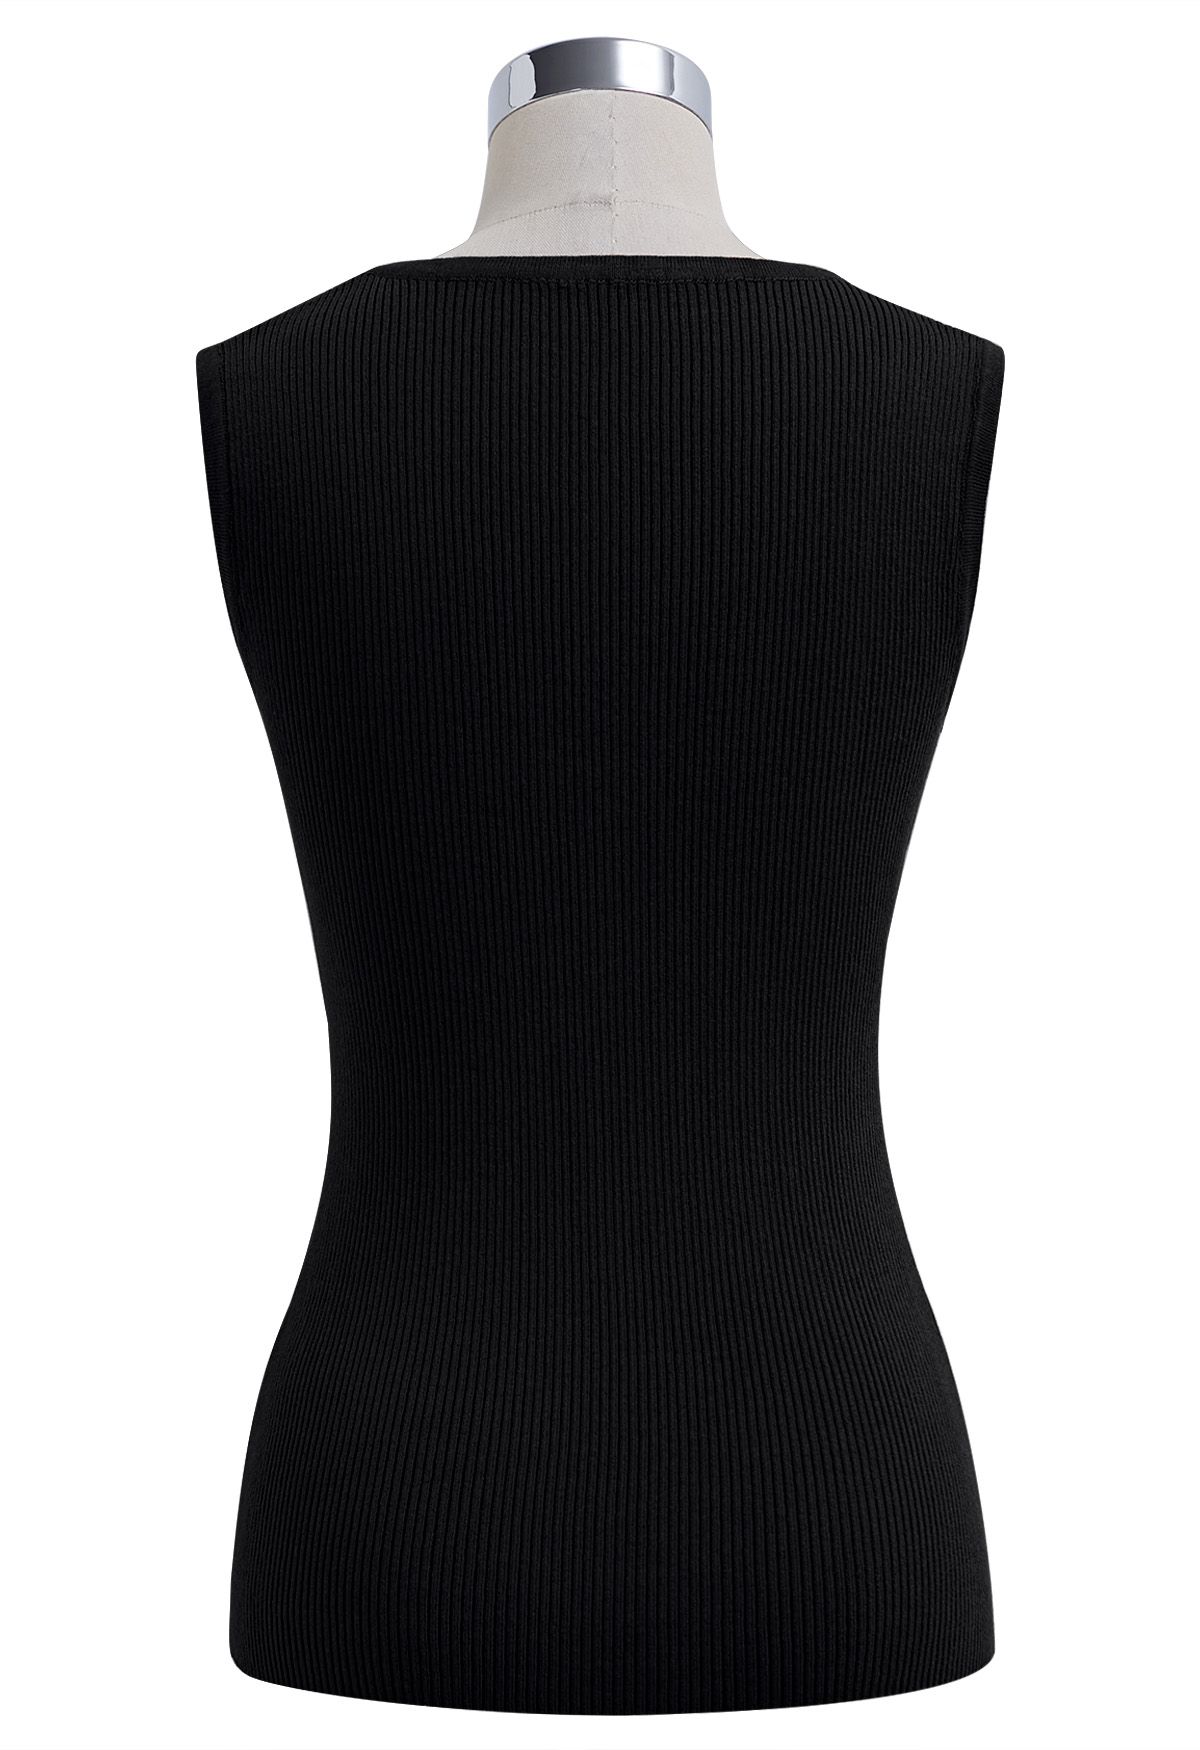 Cutout Detailing Sleeveless Knit Top in Black